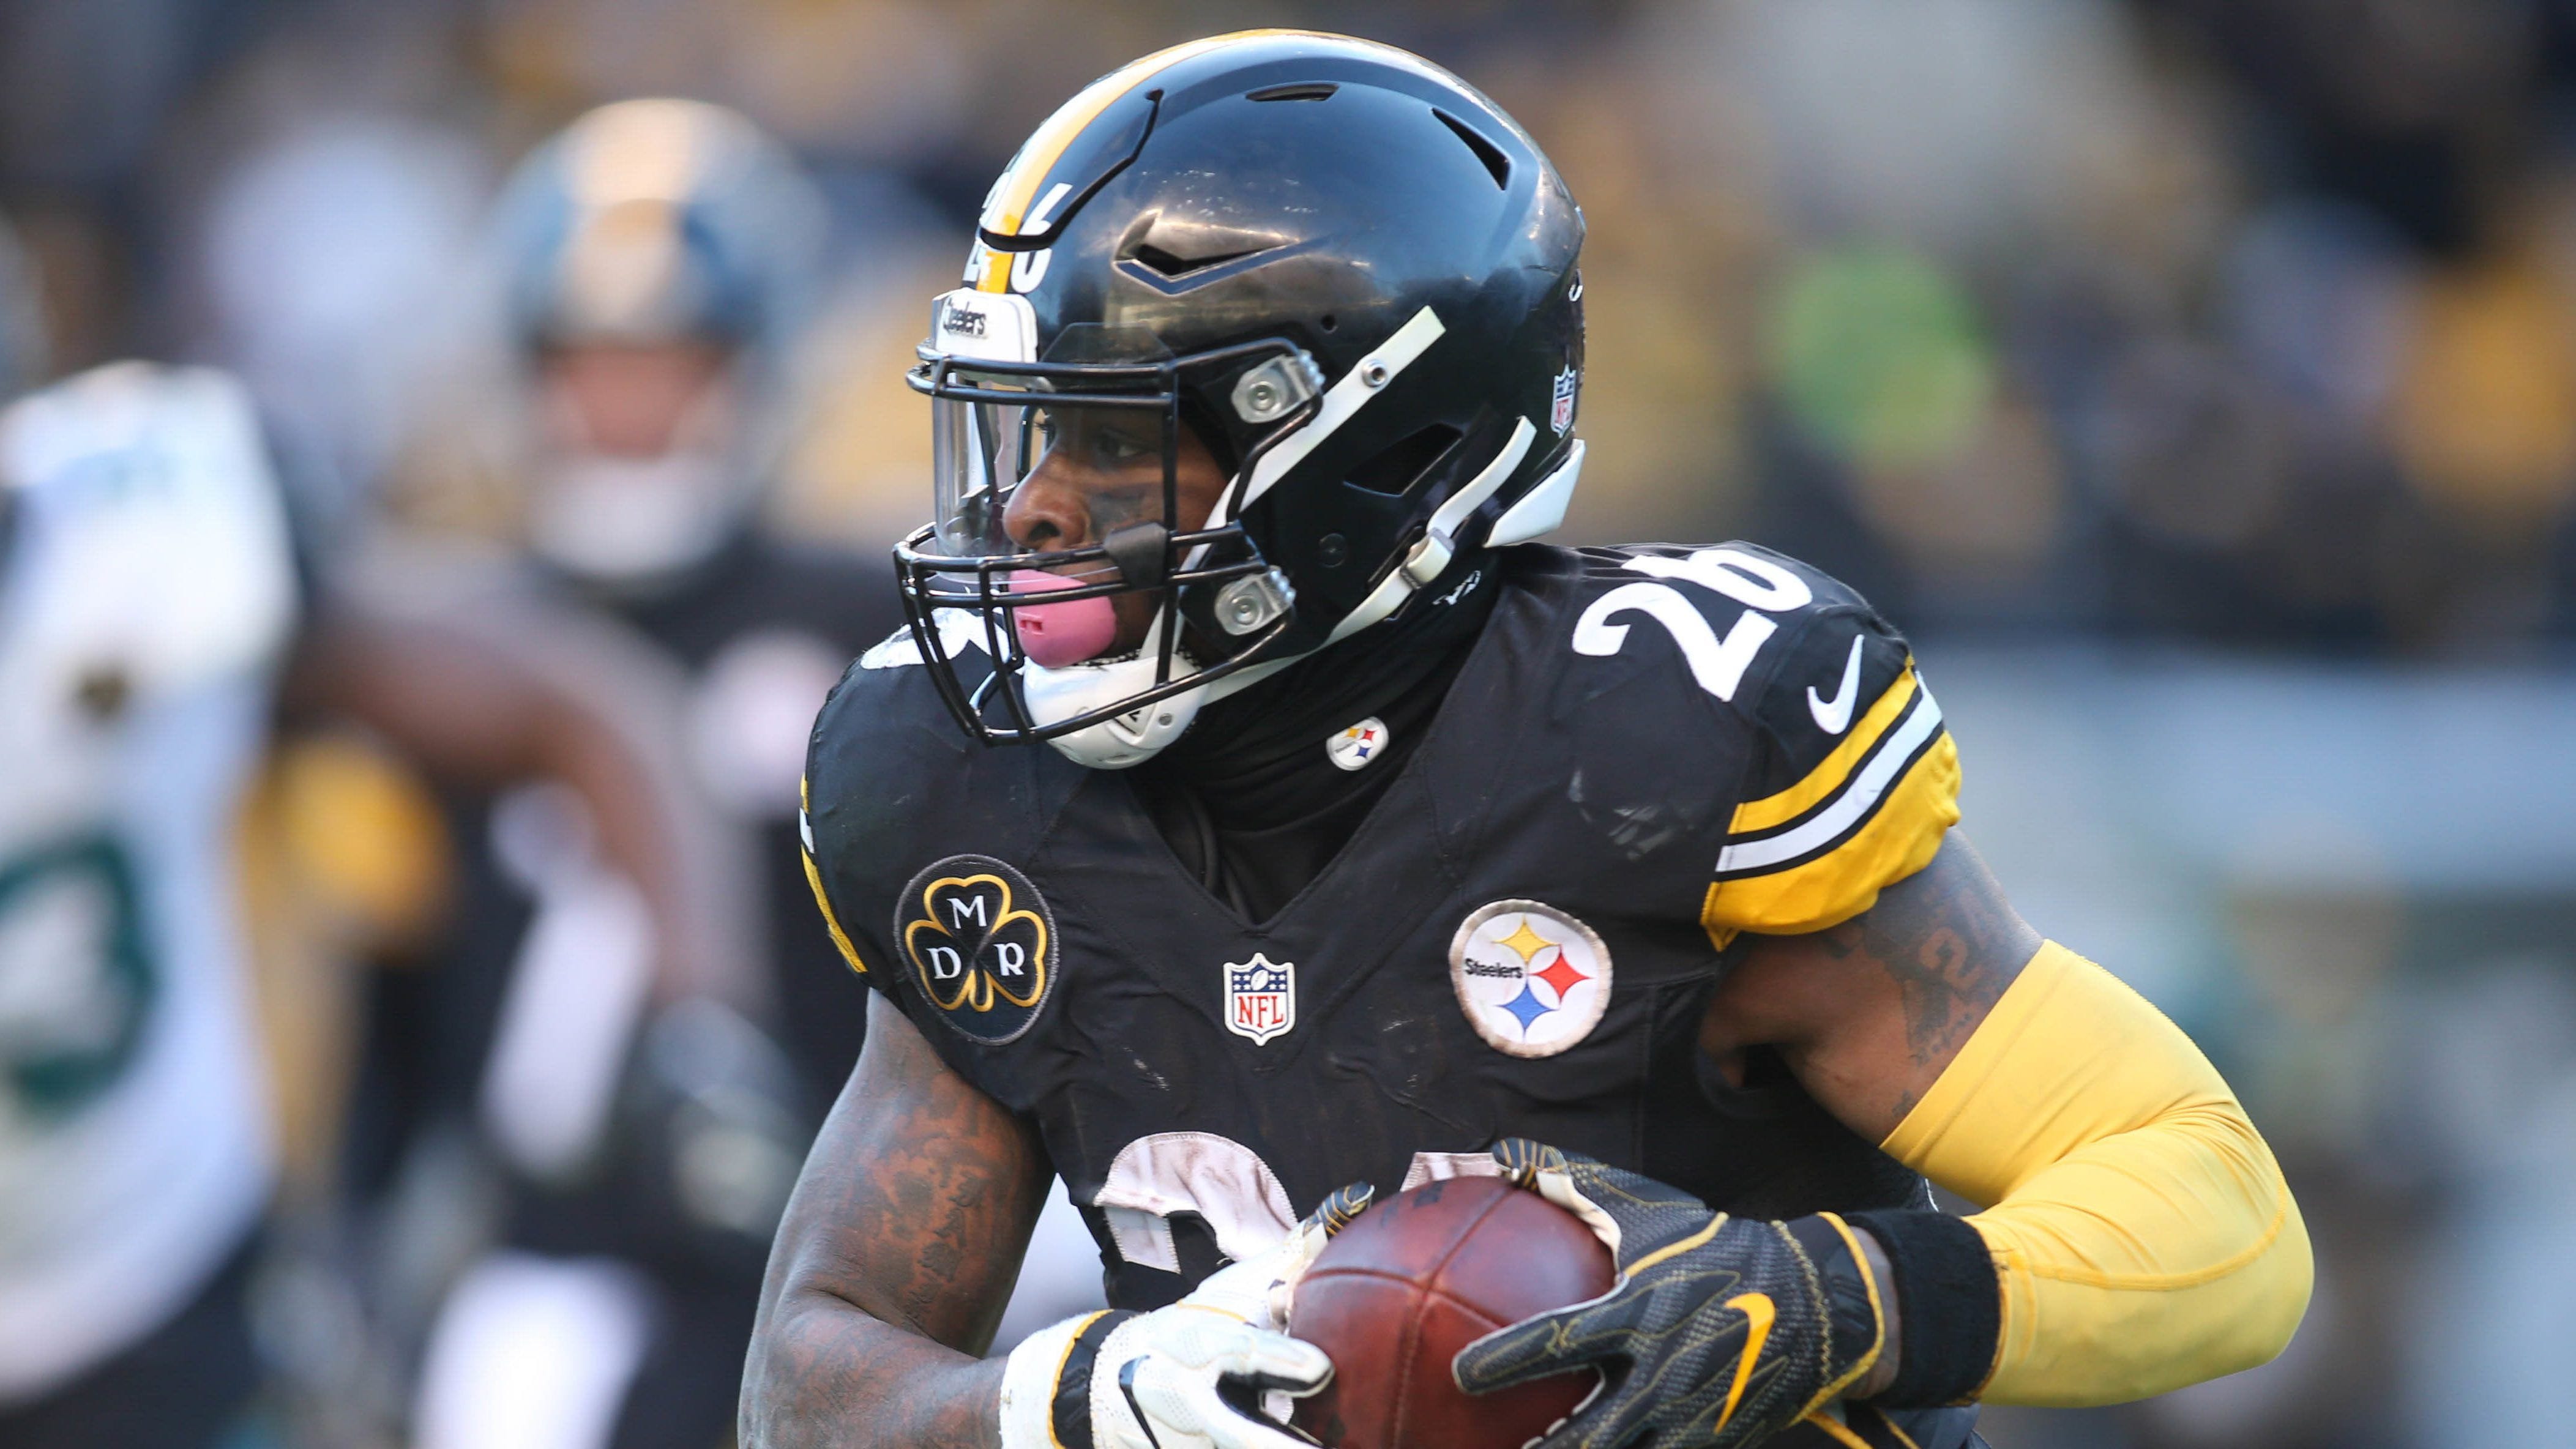 The file photo shows Pittsburgh Steelers running back Le'Veon Bell running with the ball during a game.